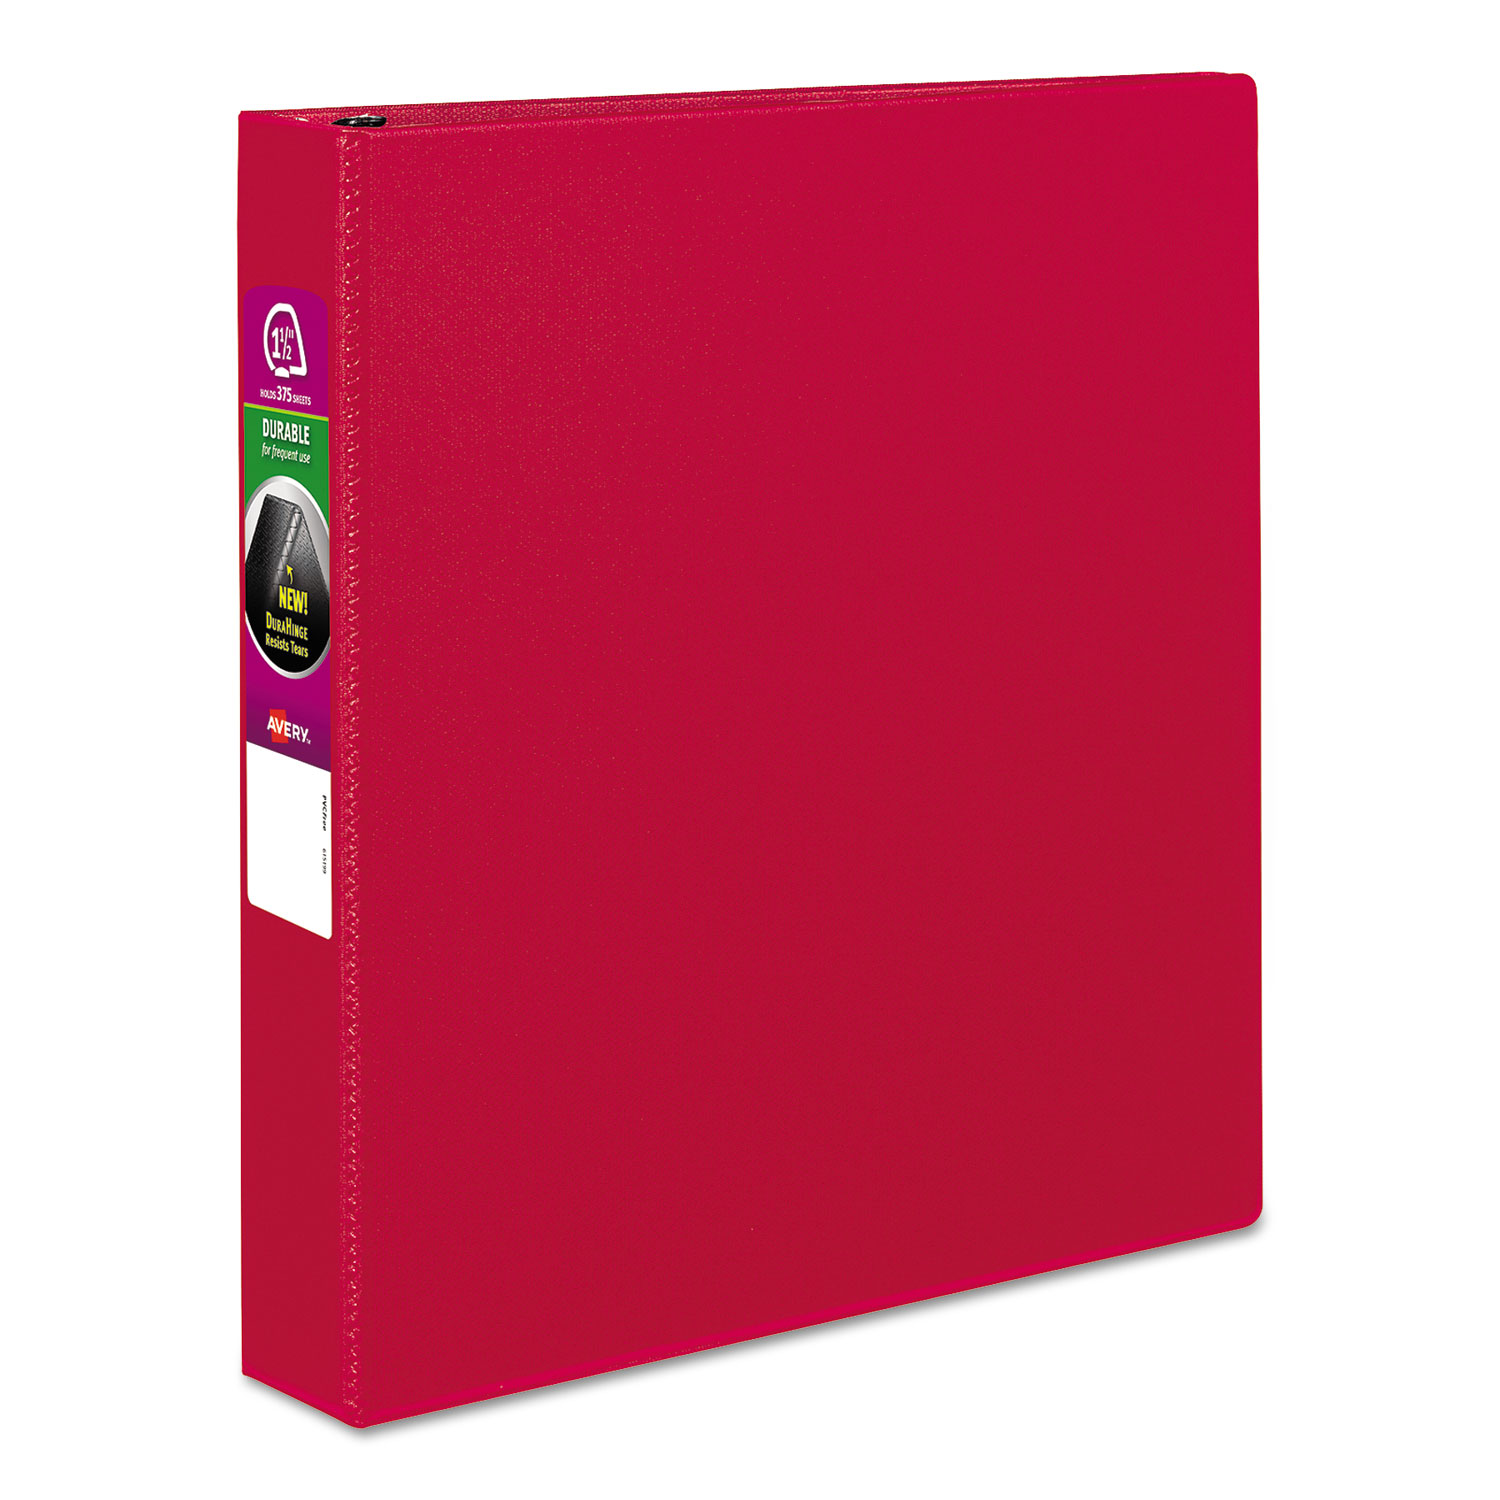  Avery 27202 Durable Non-View Binder with DuraHinge and Slant Rings, 3 Rings, 1.5 Capacity, 11 x 8.5, Red (AVE27202) 